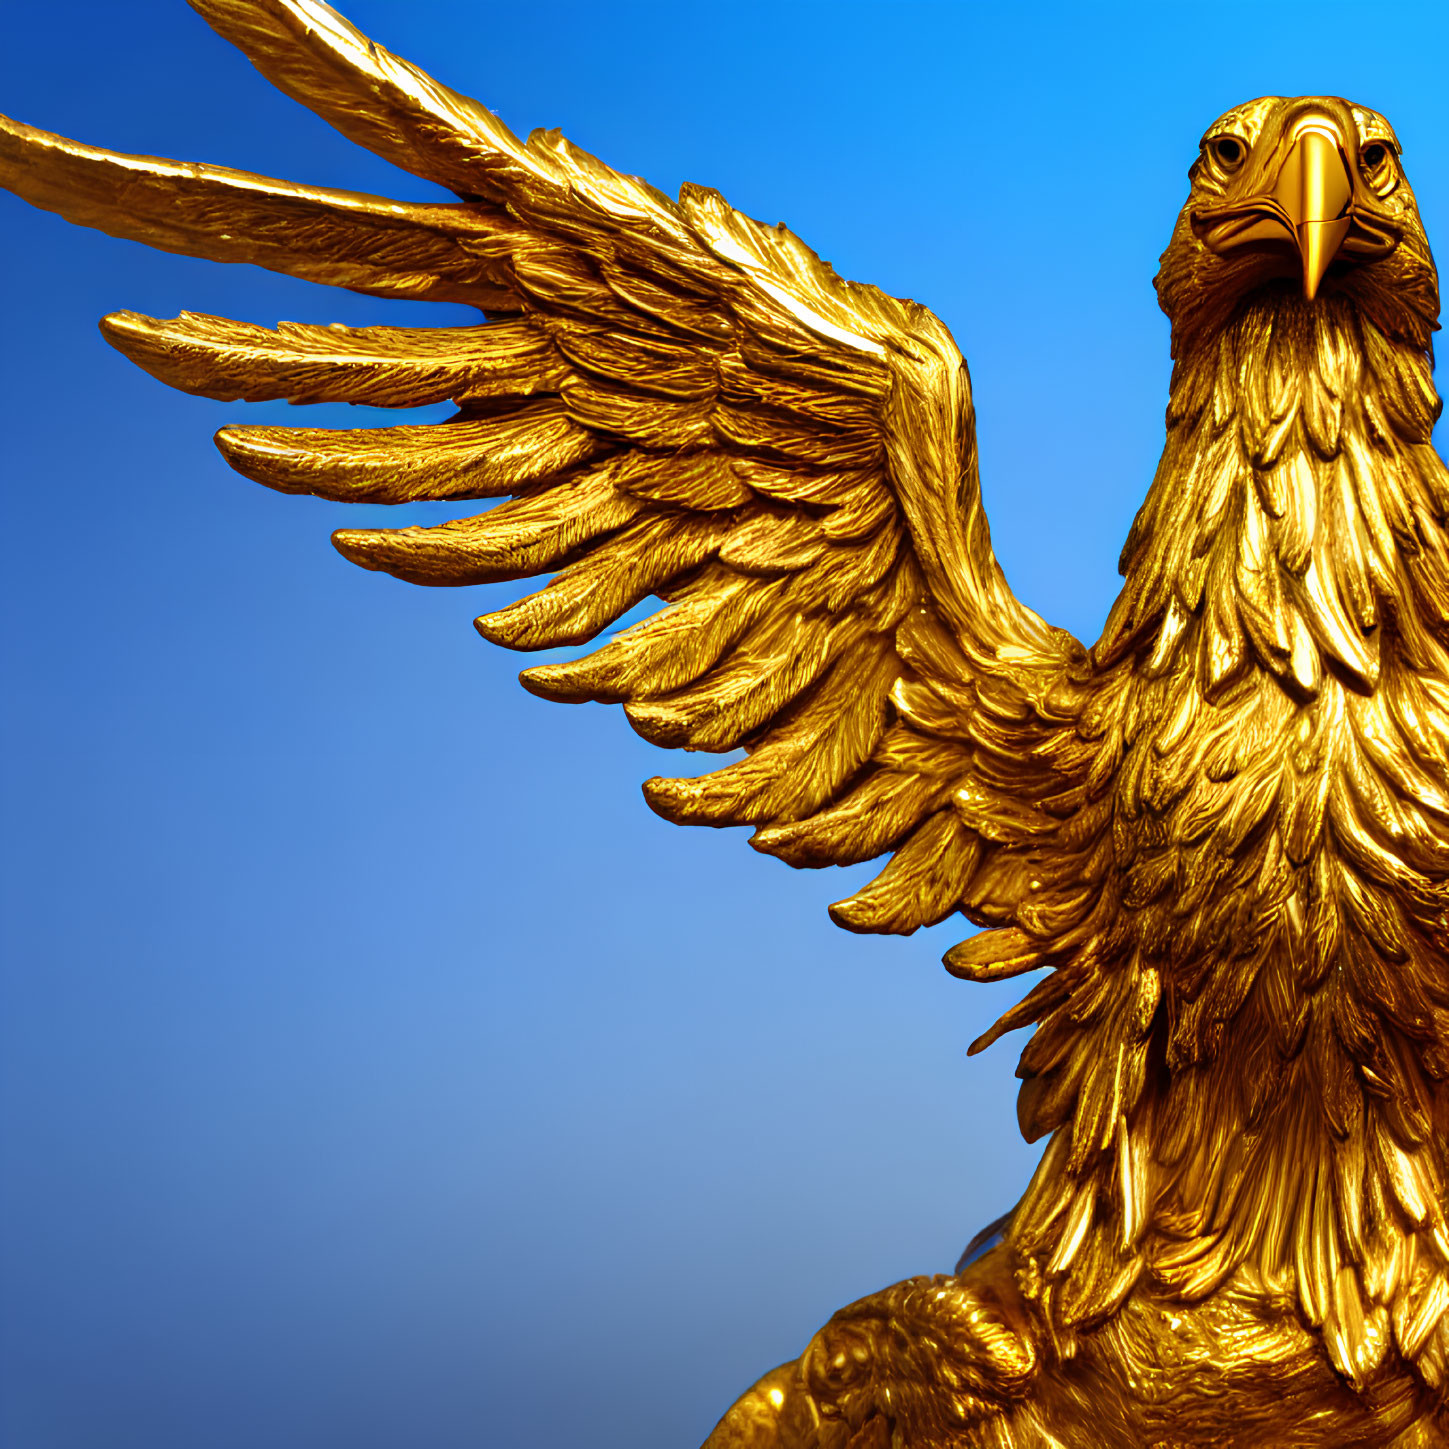 Golden Eagle Statue with Spread Wings under Clear Blue Sky